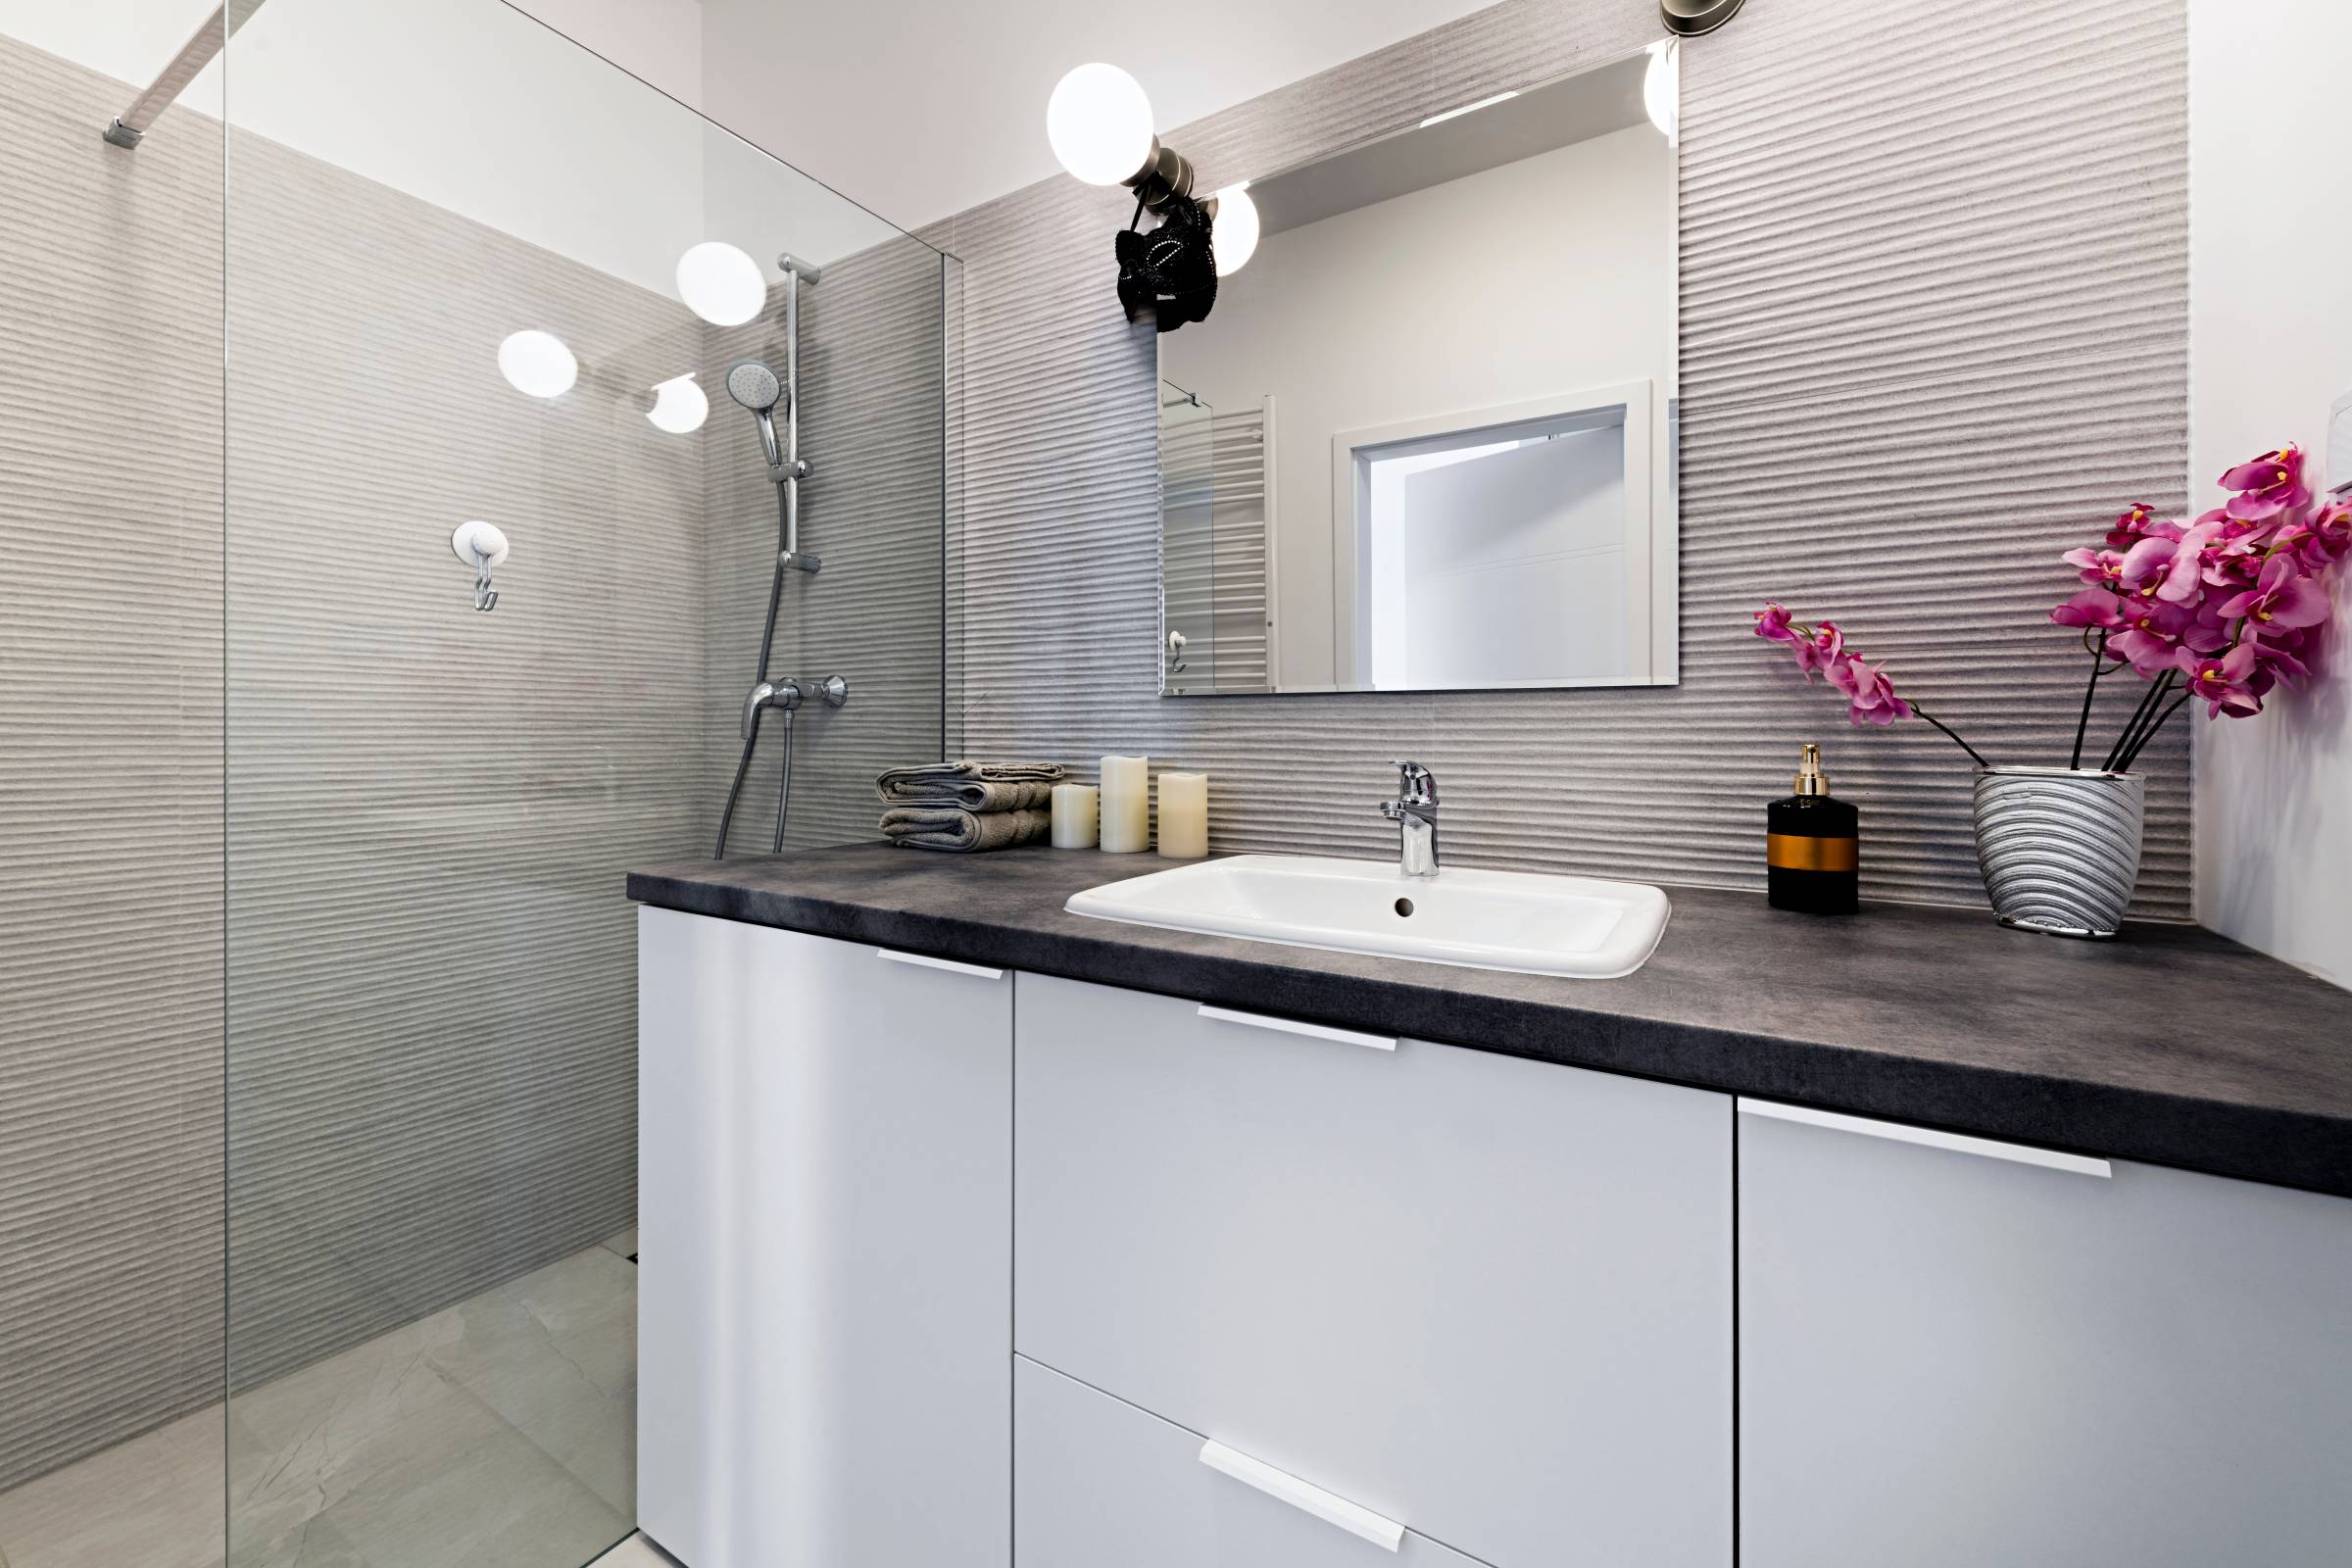 a small bathroom with artificial lighting